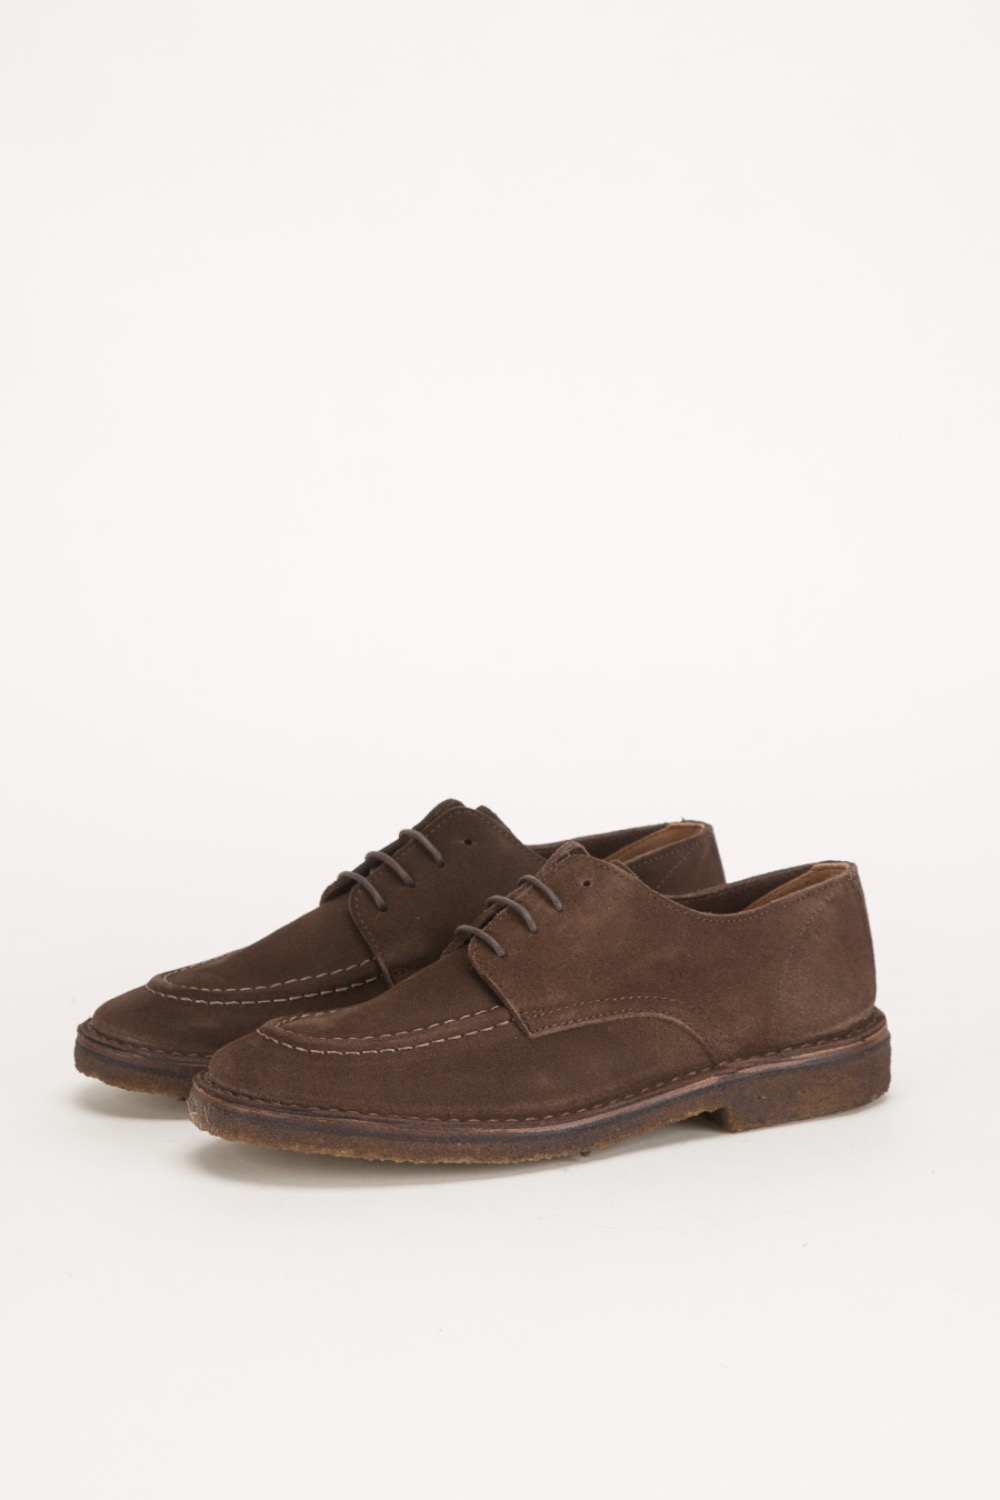 (CARRY OVER)CHARD MOC-TOE DERBY SHOE DARK BROWN SUEDE